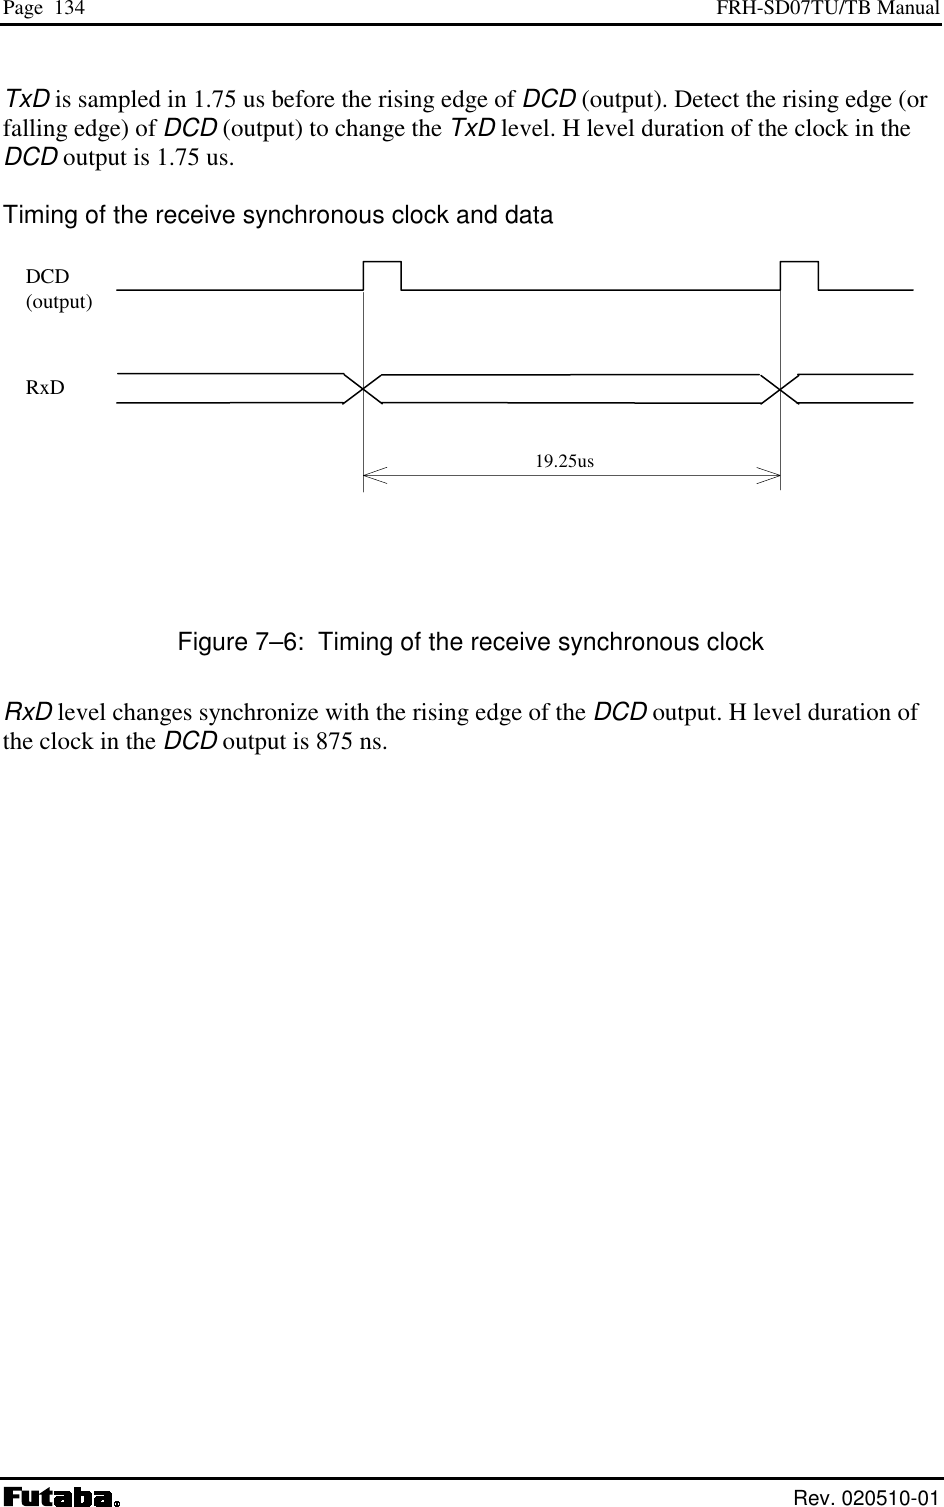 Page  134  FRH-SD07TU/TB Manual  Rev. 020510-01 TxD is sampled in 1.75 us before the rising edge of DCD (output). Detect the rising edge (or falling edge) of DCD (output) to change the TxD level. H level duration of the clock in the DCD output is 1.75 us.  Timing of the receive synchronous clock and data               Figure 7–6:  Timing of the receive synchronous clock RxD level changes synchronize with the rising edge of the DCD output. H level duration of the clock in the DCD output is 875 ns. 19.25us DCD (output) RxD 